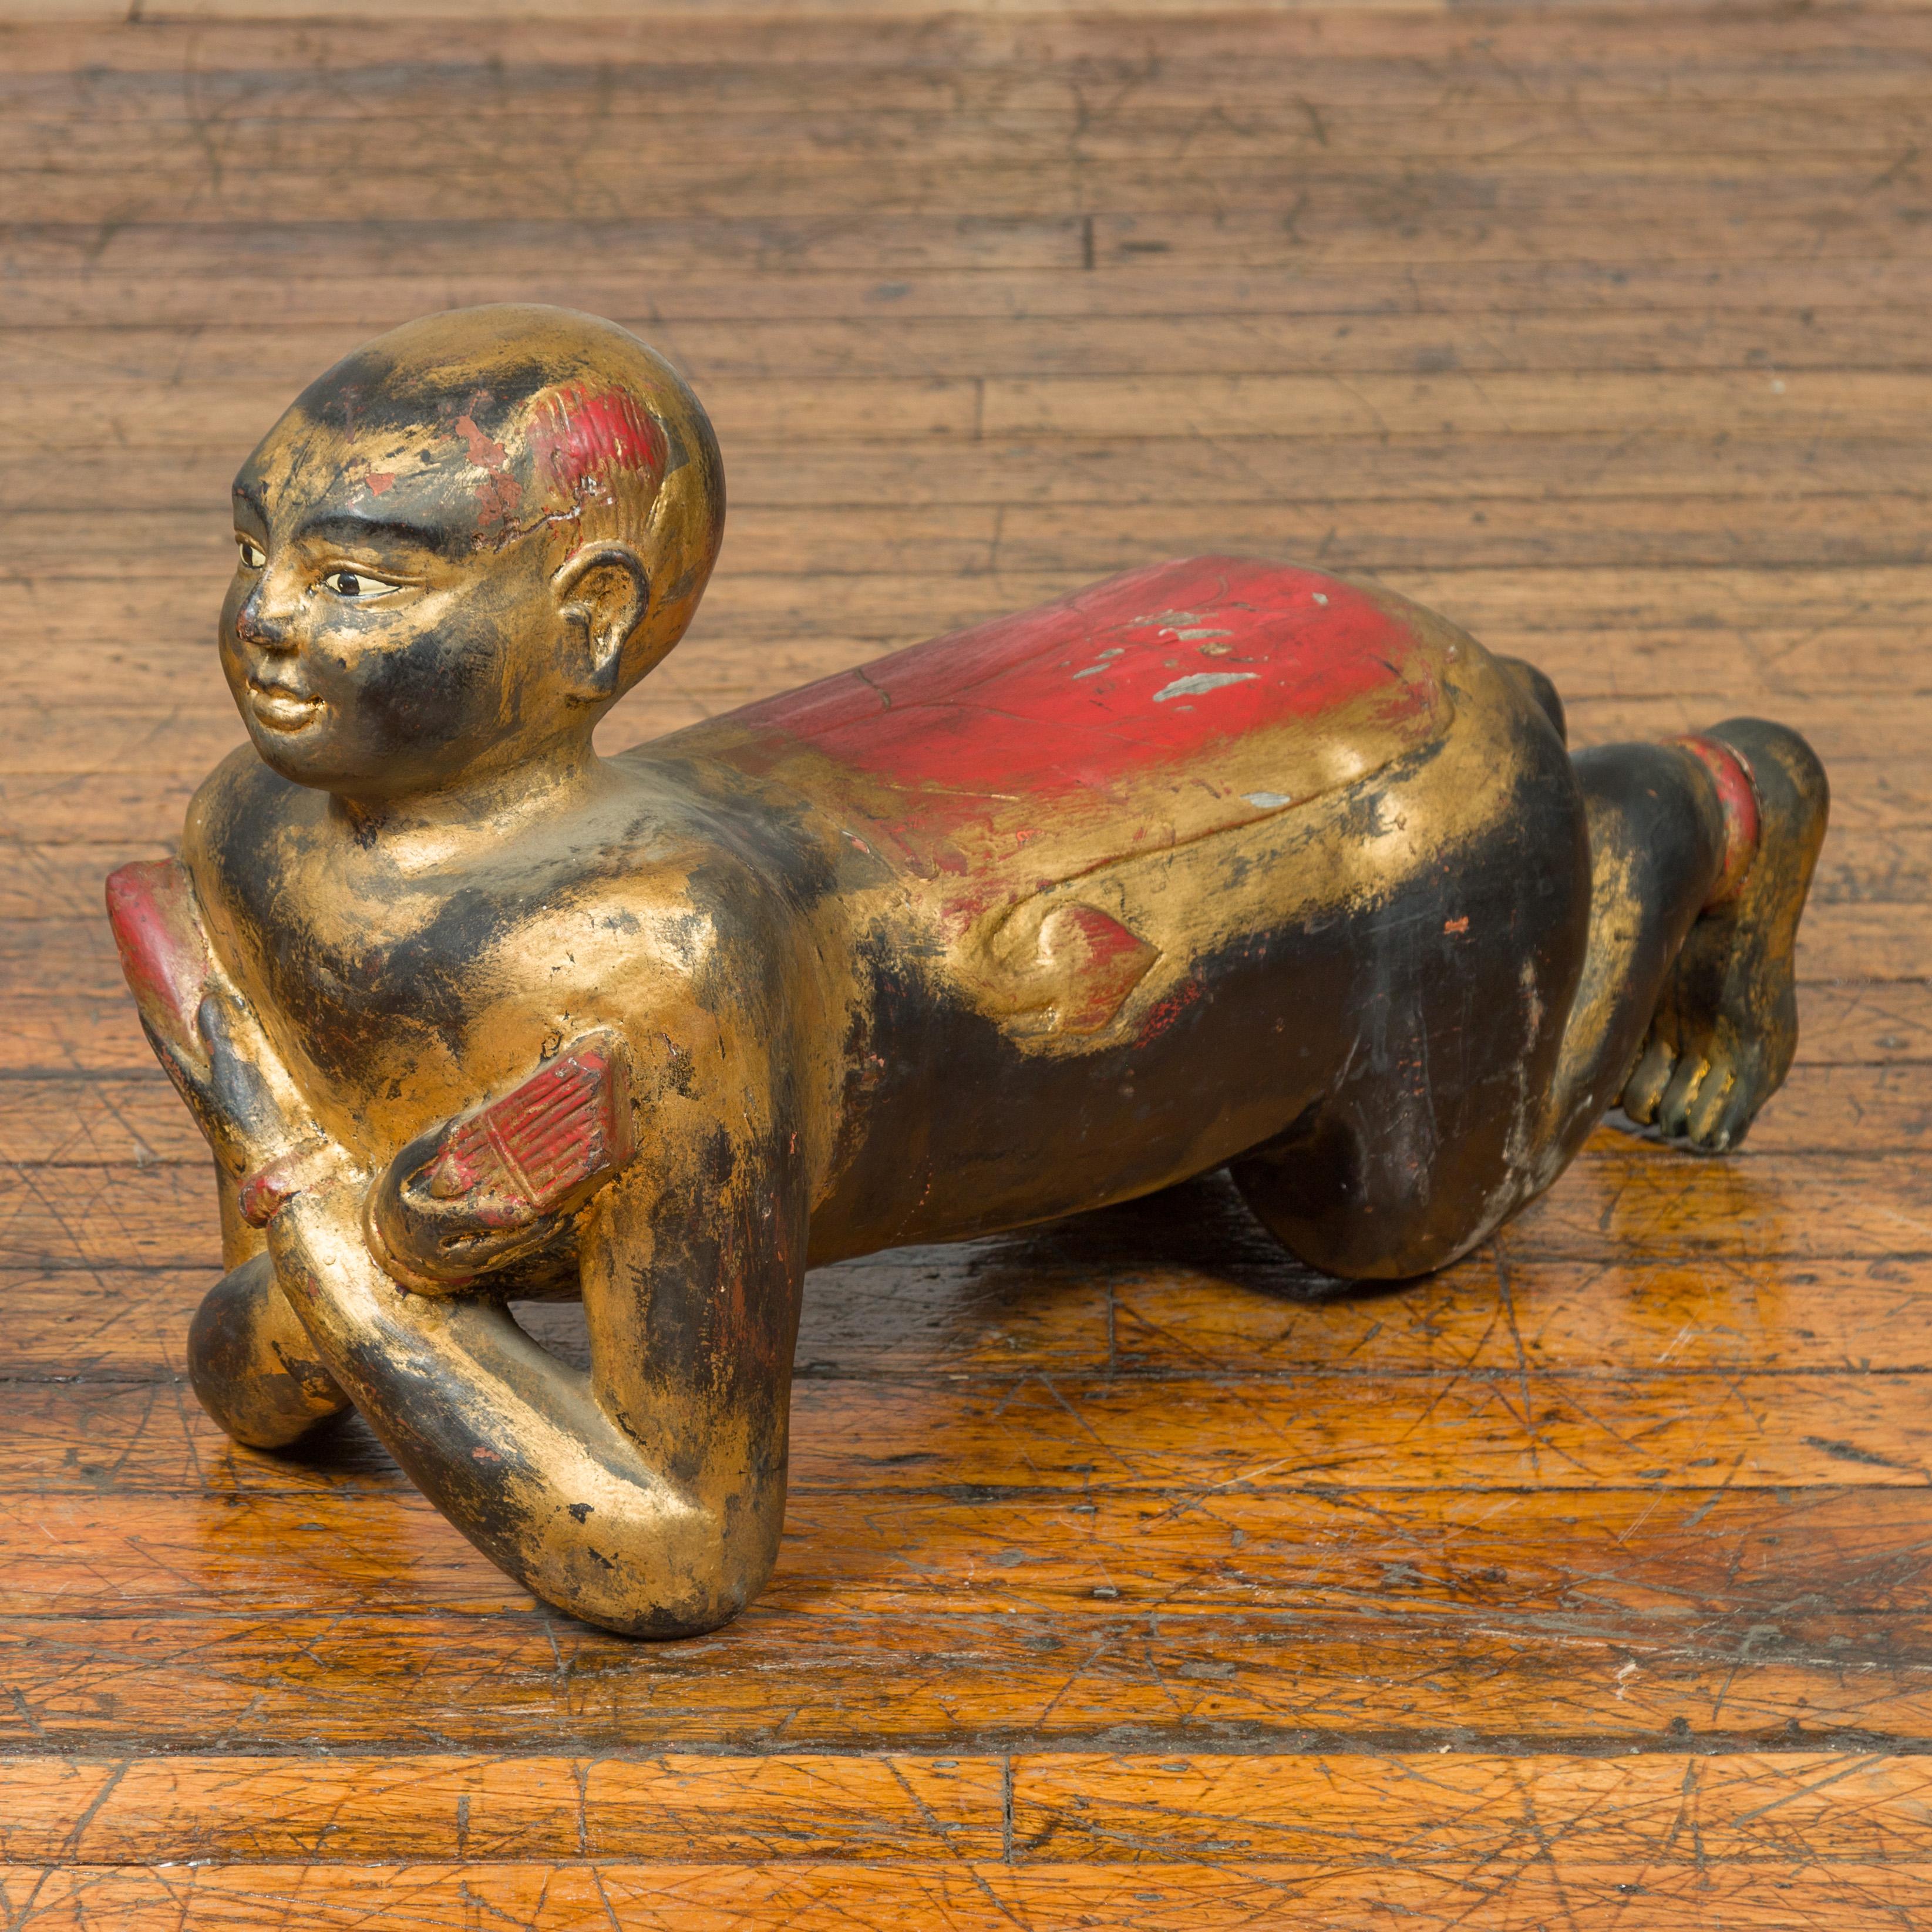 A vintage Thai ceremonial carved giltwood temple guardian sculpture from the mid-20th century, with gold, black and red patina. Crafted in Thailand during the midcentury period, this sculpture features a ceremonial temple guardian, kneeling with his